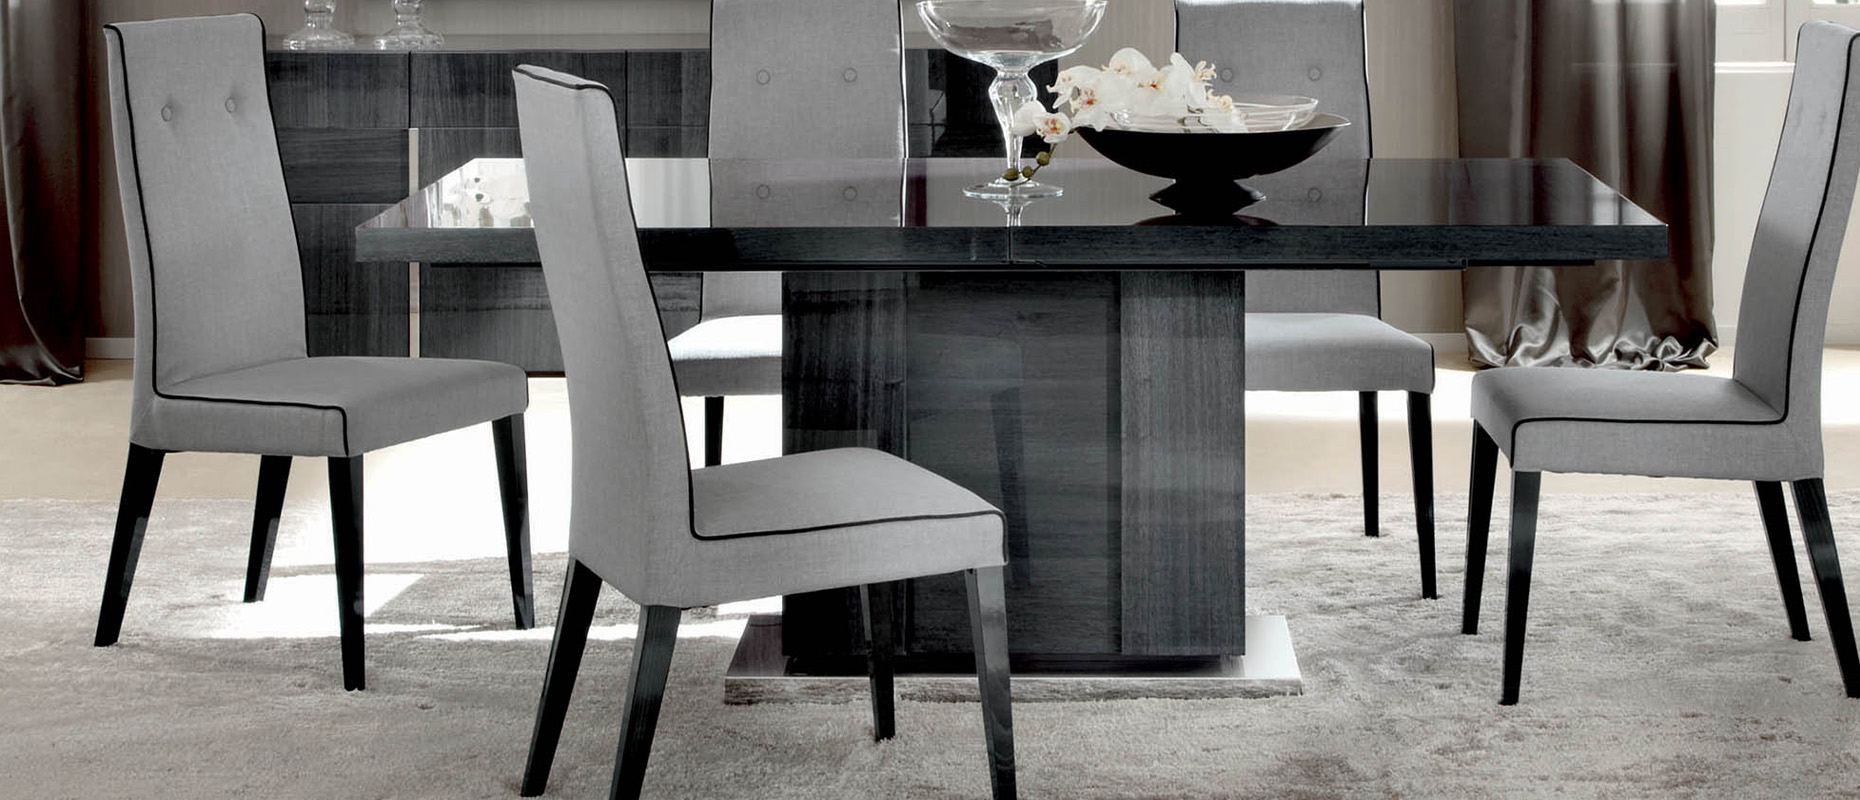 Dining Chairs & Barstools at Forrest Furnishing